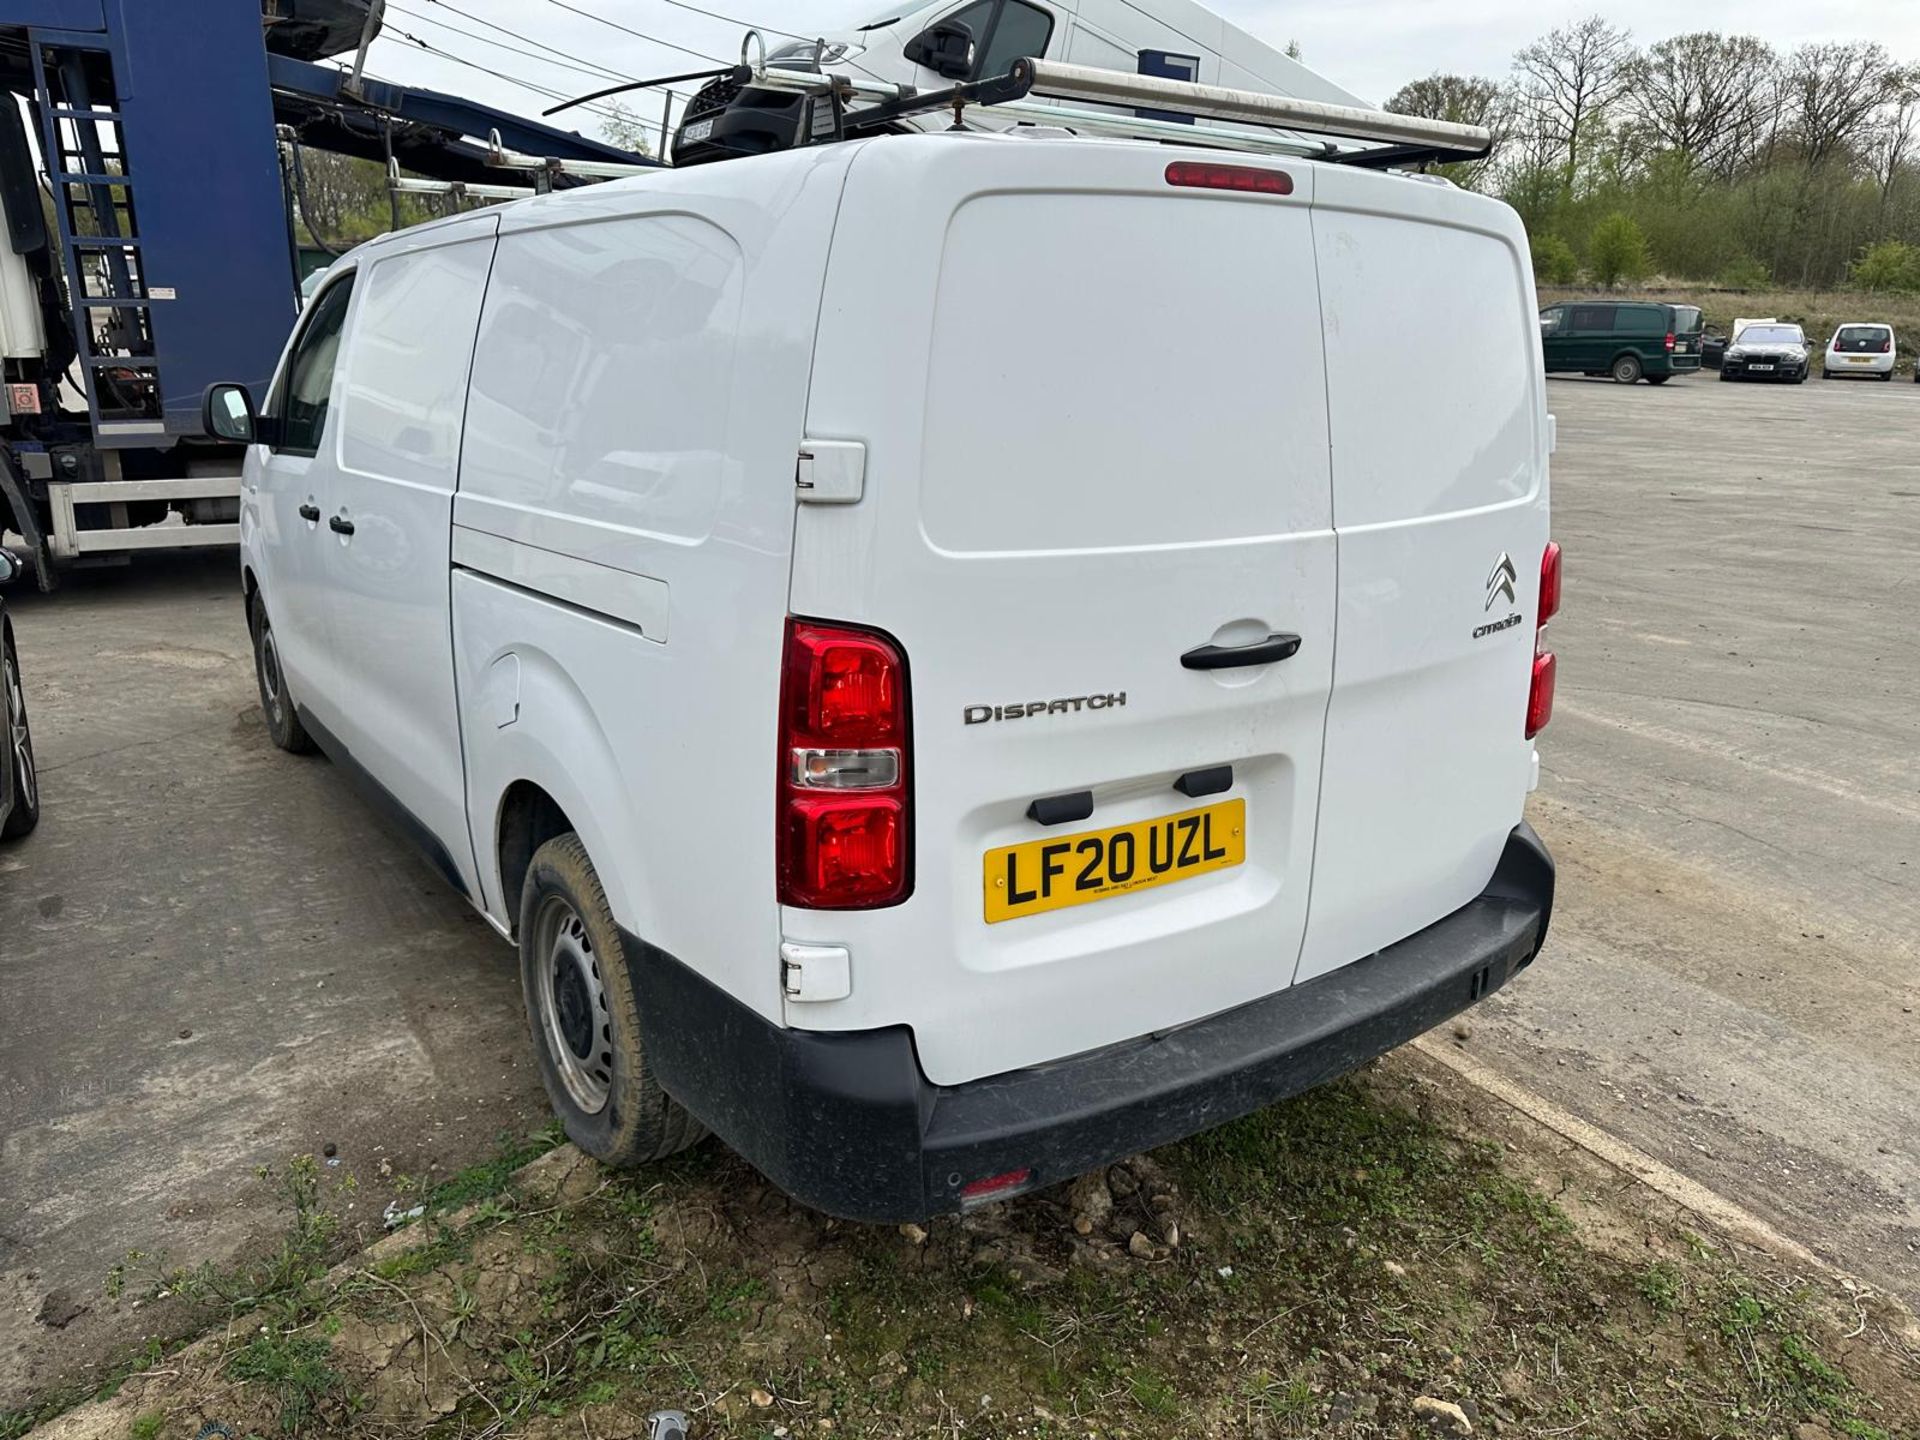 2020 20 CITROEN DISPATCH PANEL VAN - 2.0 6 SPEED - 111K MILES - AIR CON - PLY LINED - EURO 6  - Image 7 of 10